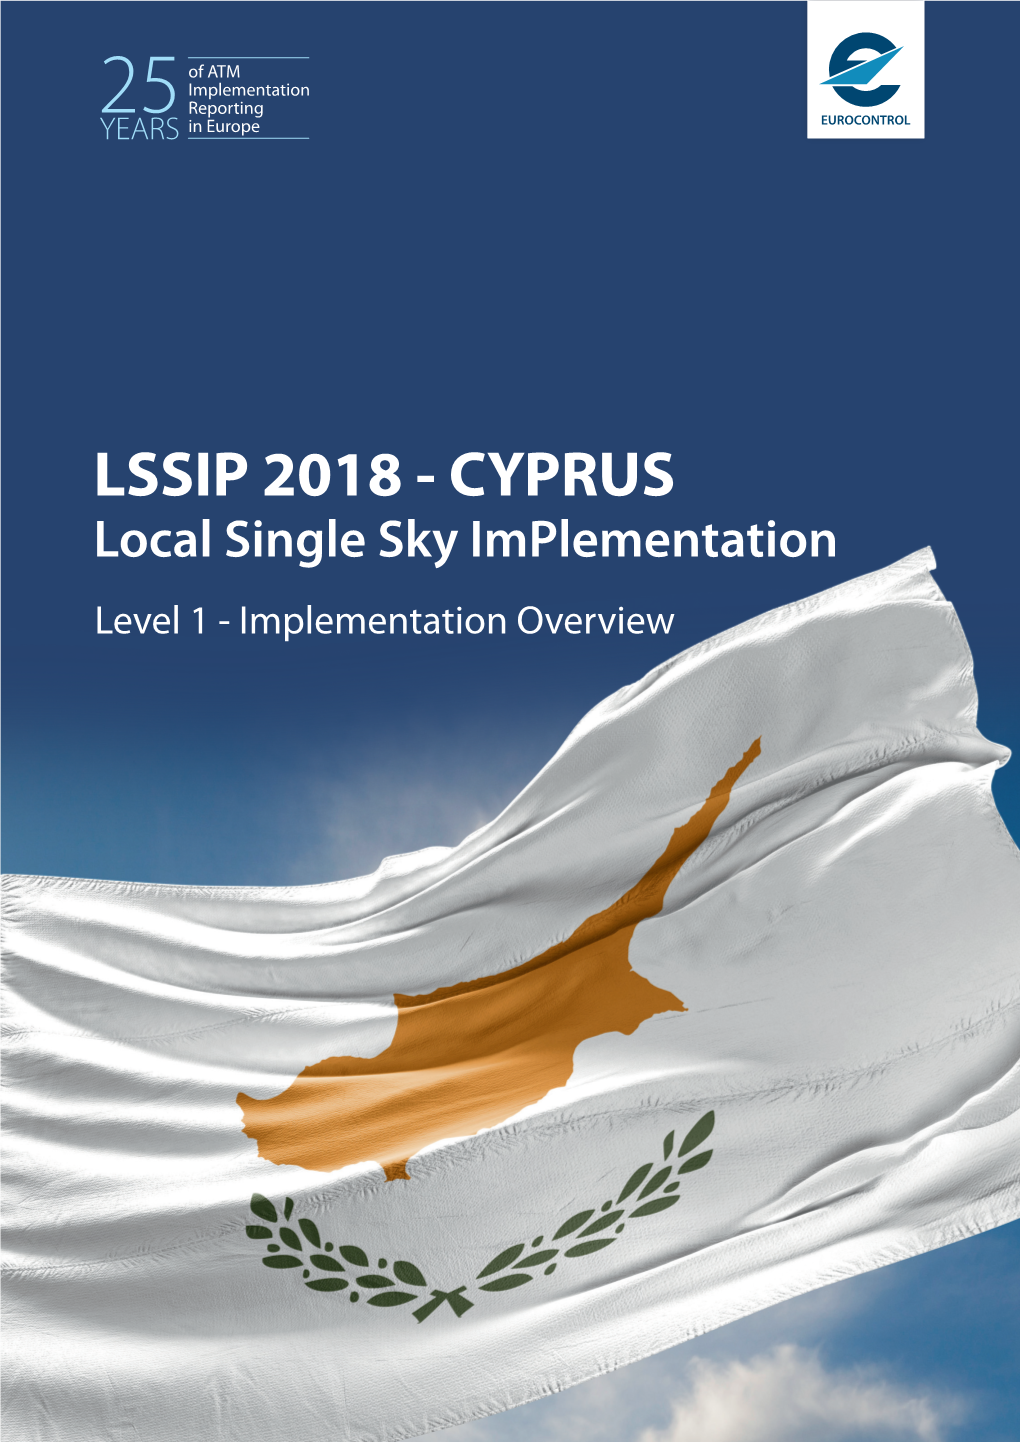 LSSIP 2018 - CYPRUS Local Single Sky Implementation Level 1 - Implementation Overview